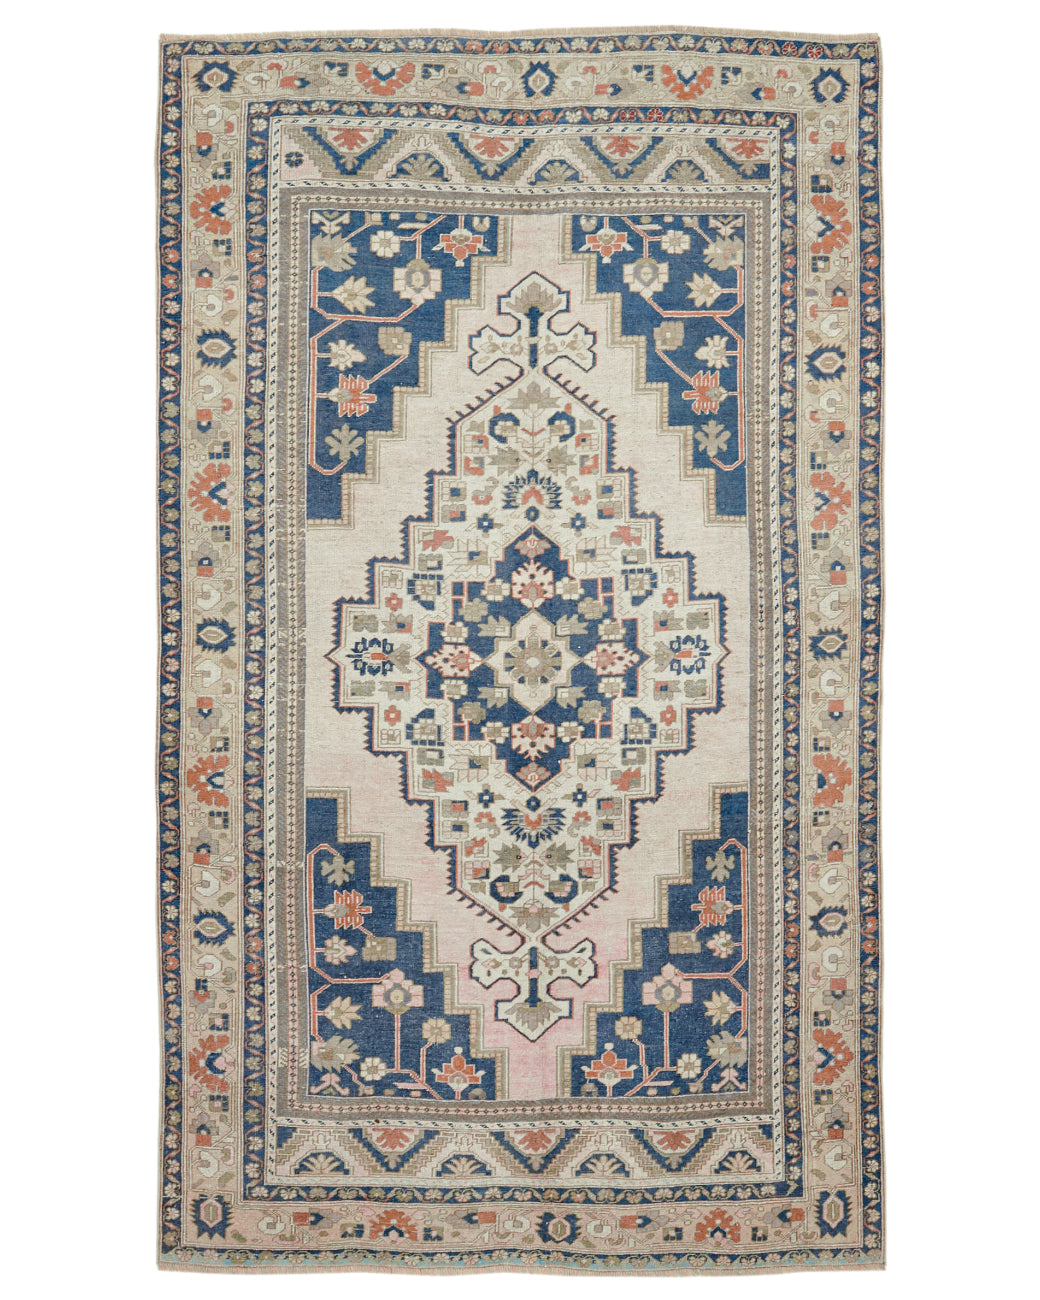 Taspinar 6' 4" X 10' 10" Hand-Knotted Wool Rug 6' 4" X 10' 10" (193 X 330) / Pink / Blue